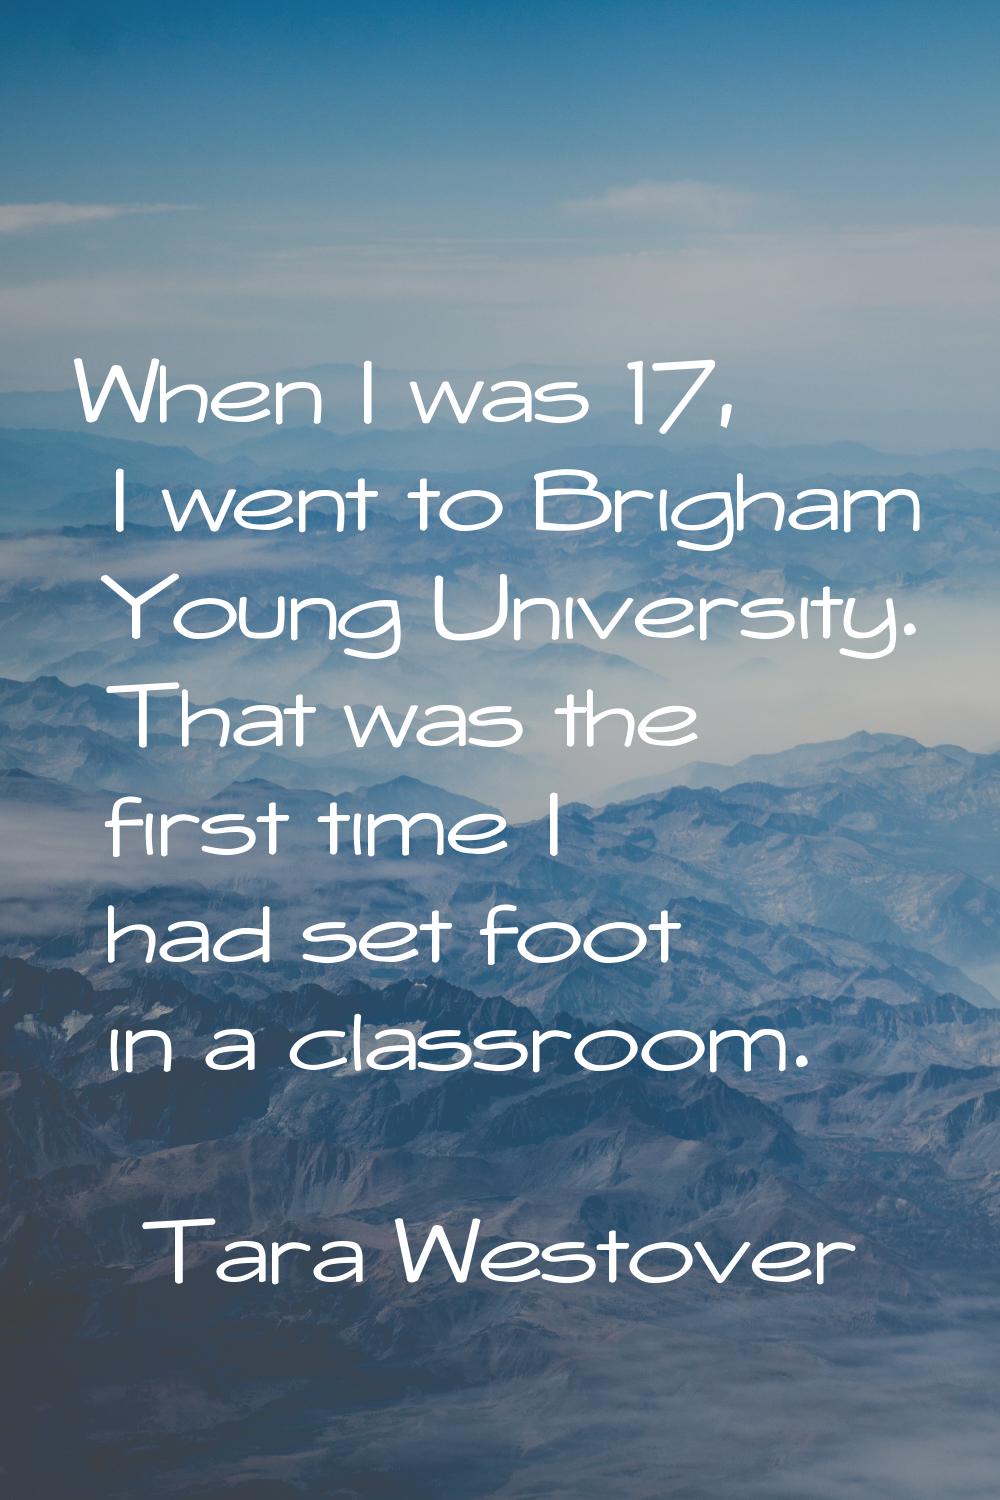 When I was 17, I went to Brigham Young University. That was the first time I had set foot in a clas